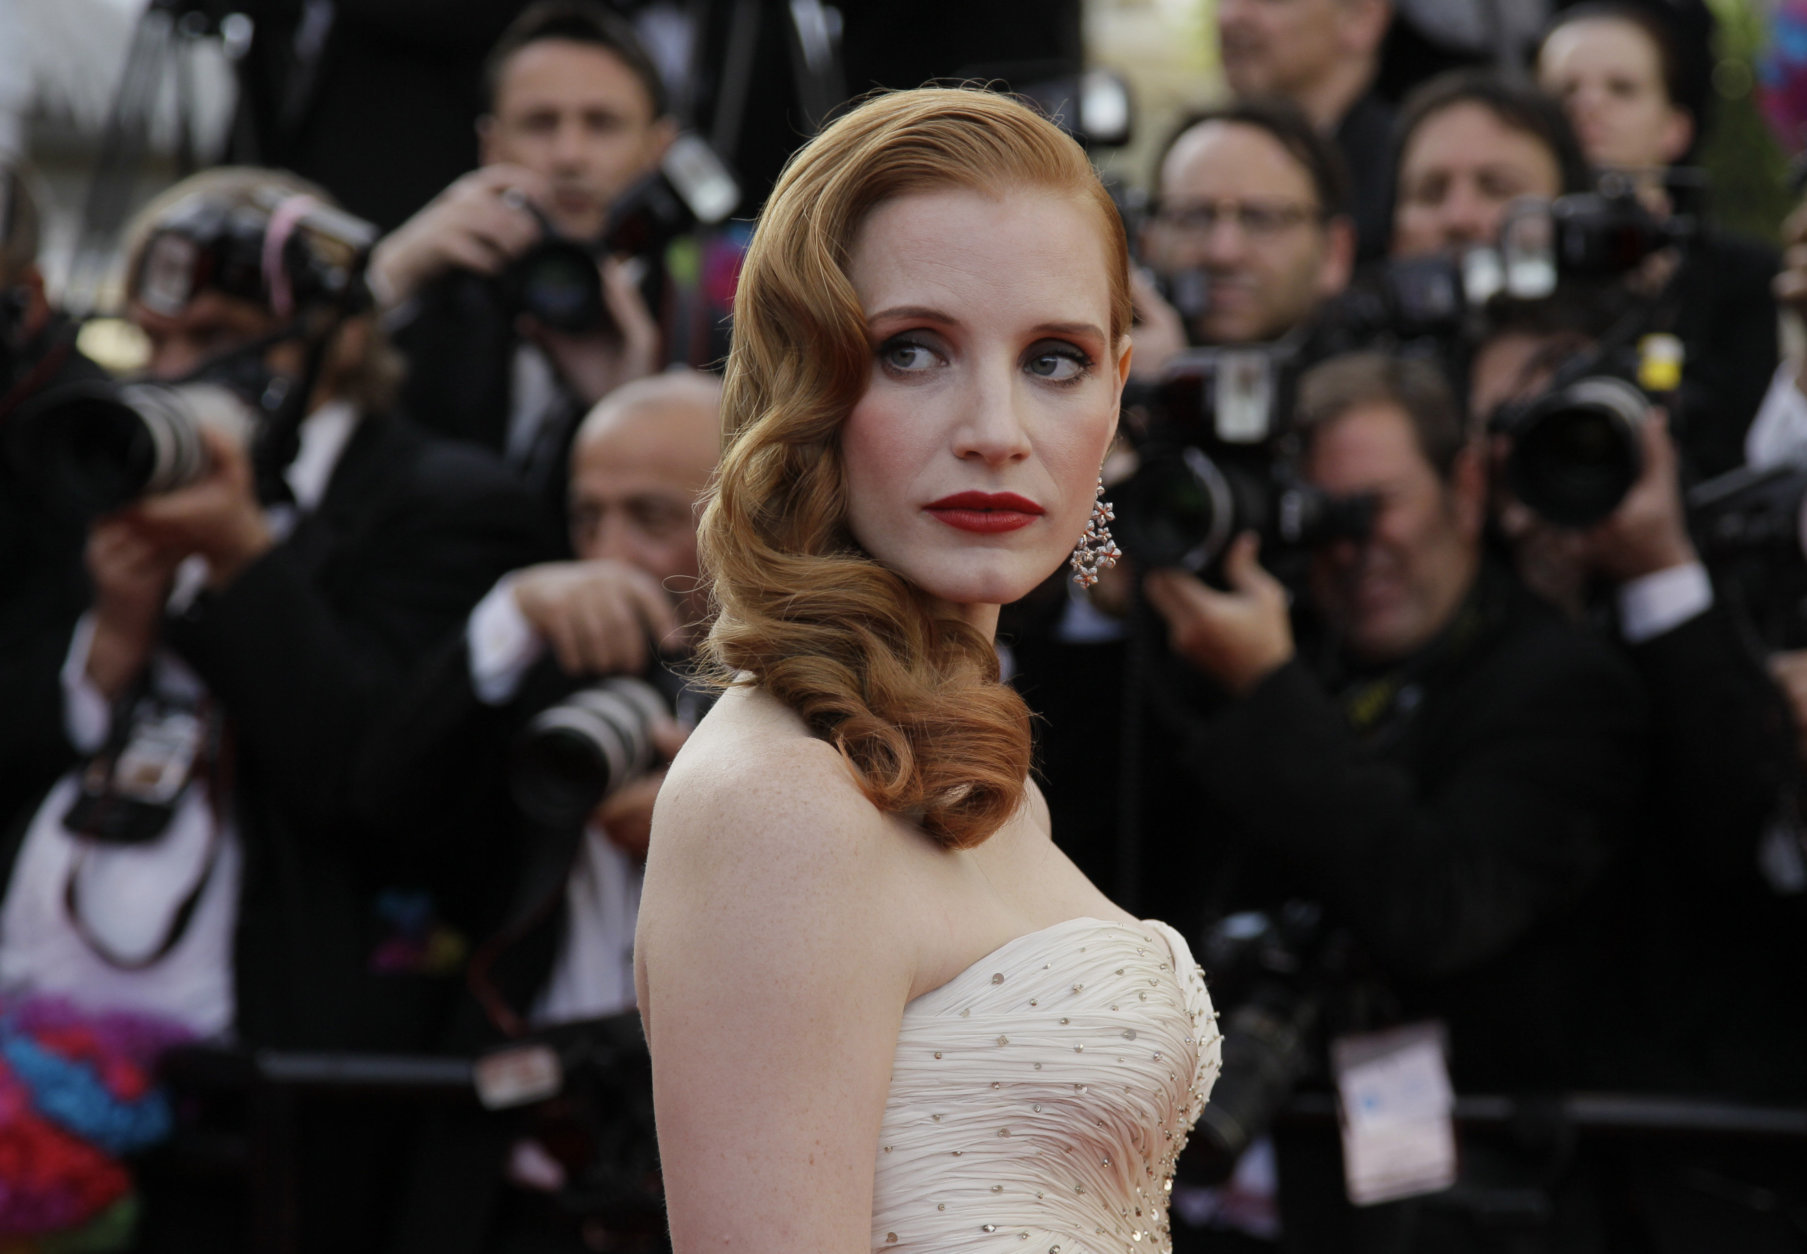 Actress Jessica Chastain arrives for the screening of Madagascar 3: Europe's Most Wanted, at the 65th international film festival, in Cannes, southern France, Friday, May 18, 2012. (AP Photo/Francois Mori)